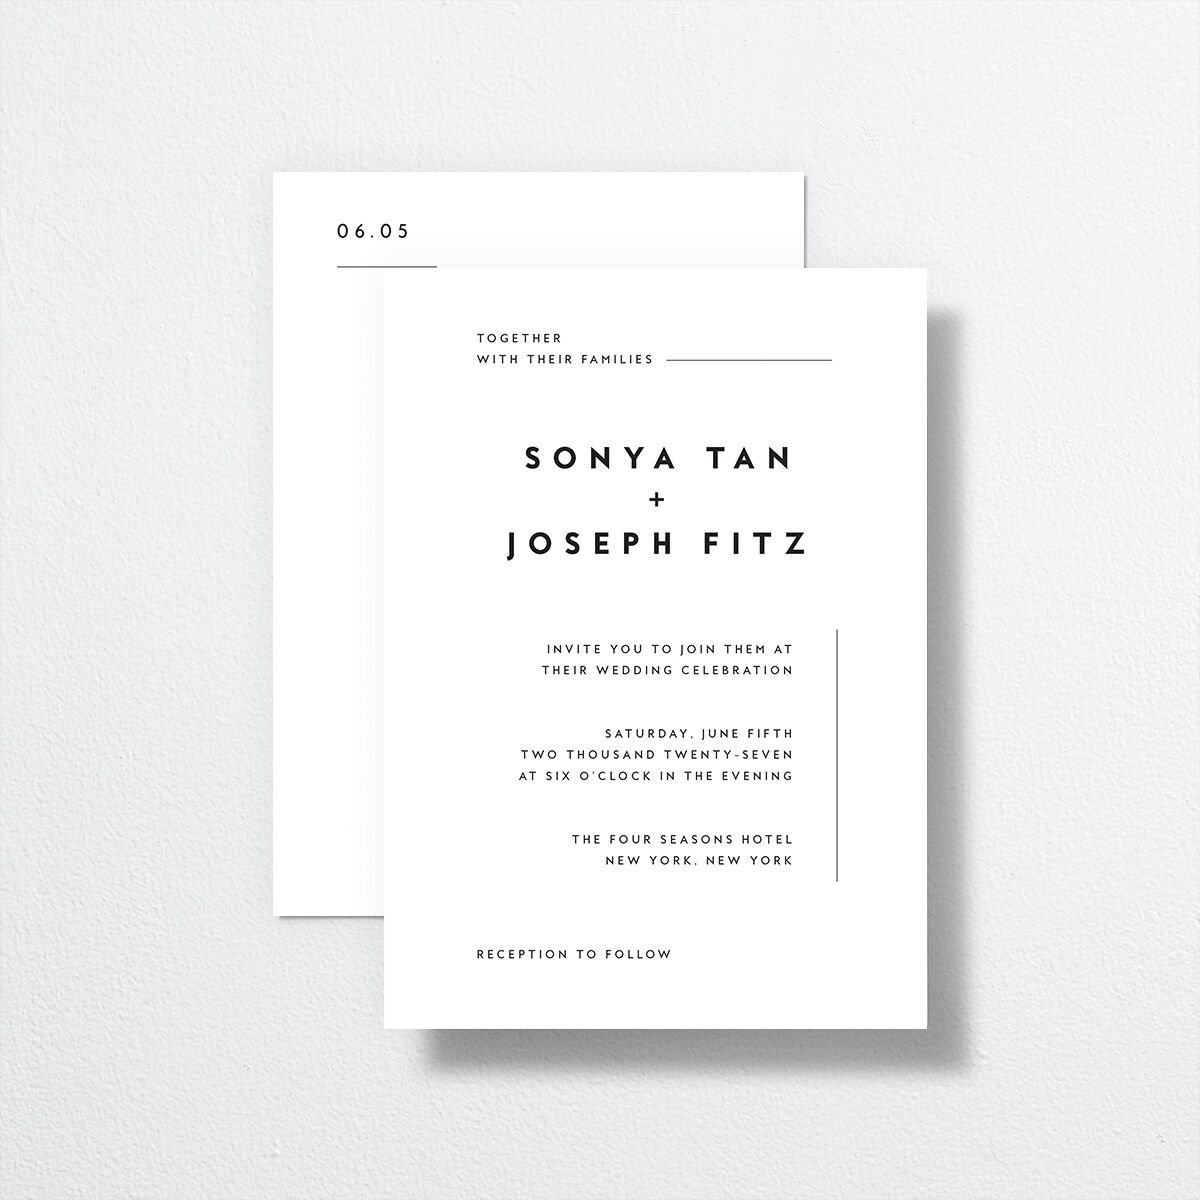 Simply Modern Wedding Invitations front-and-back in White